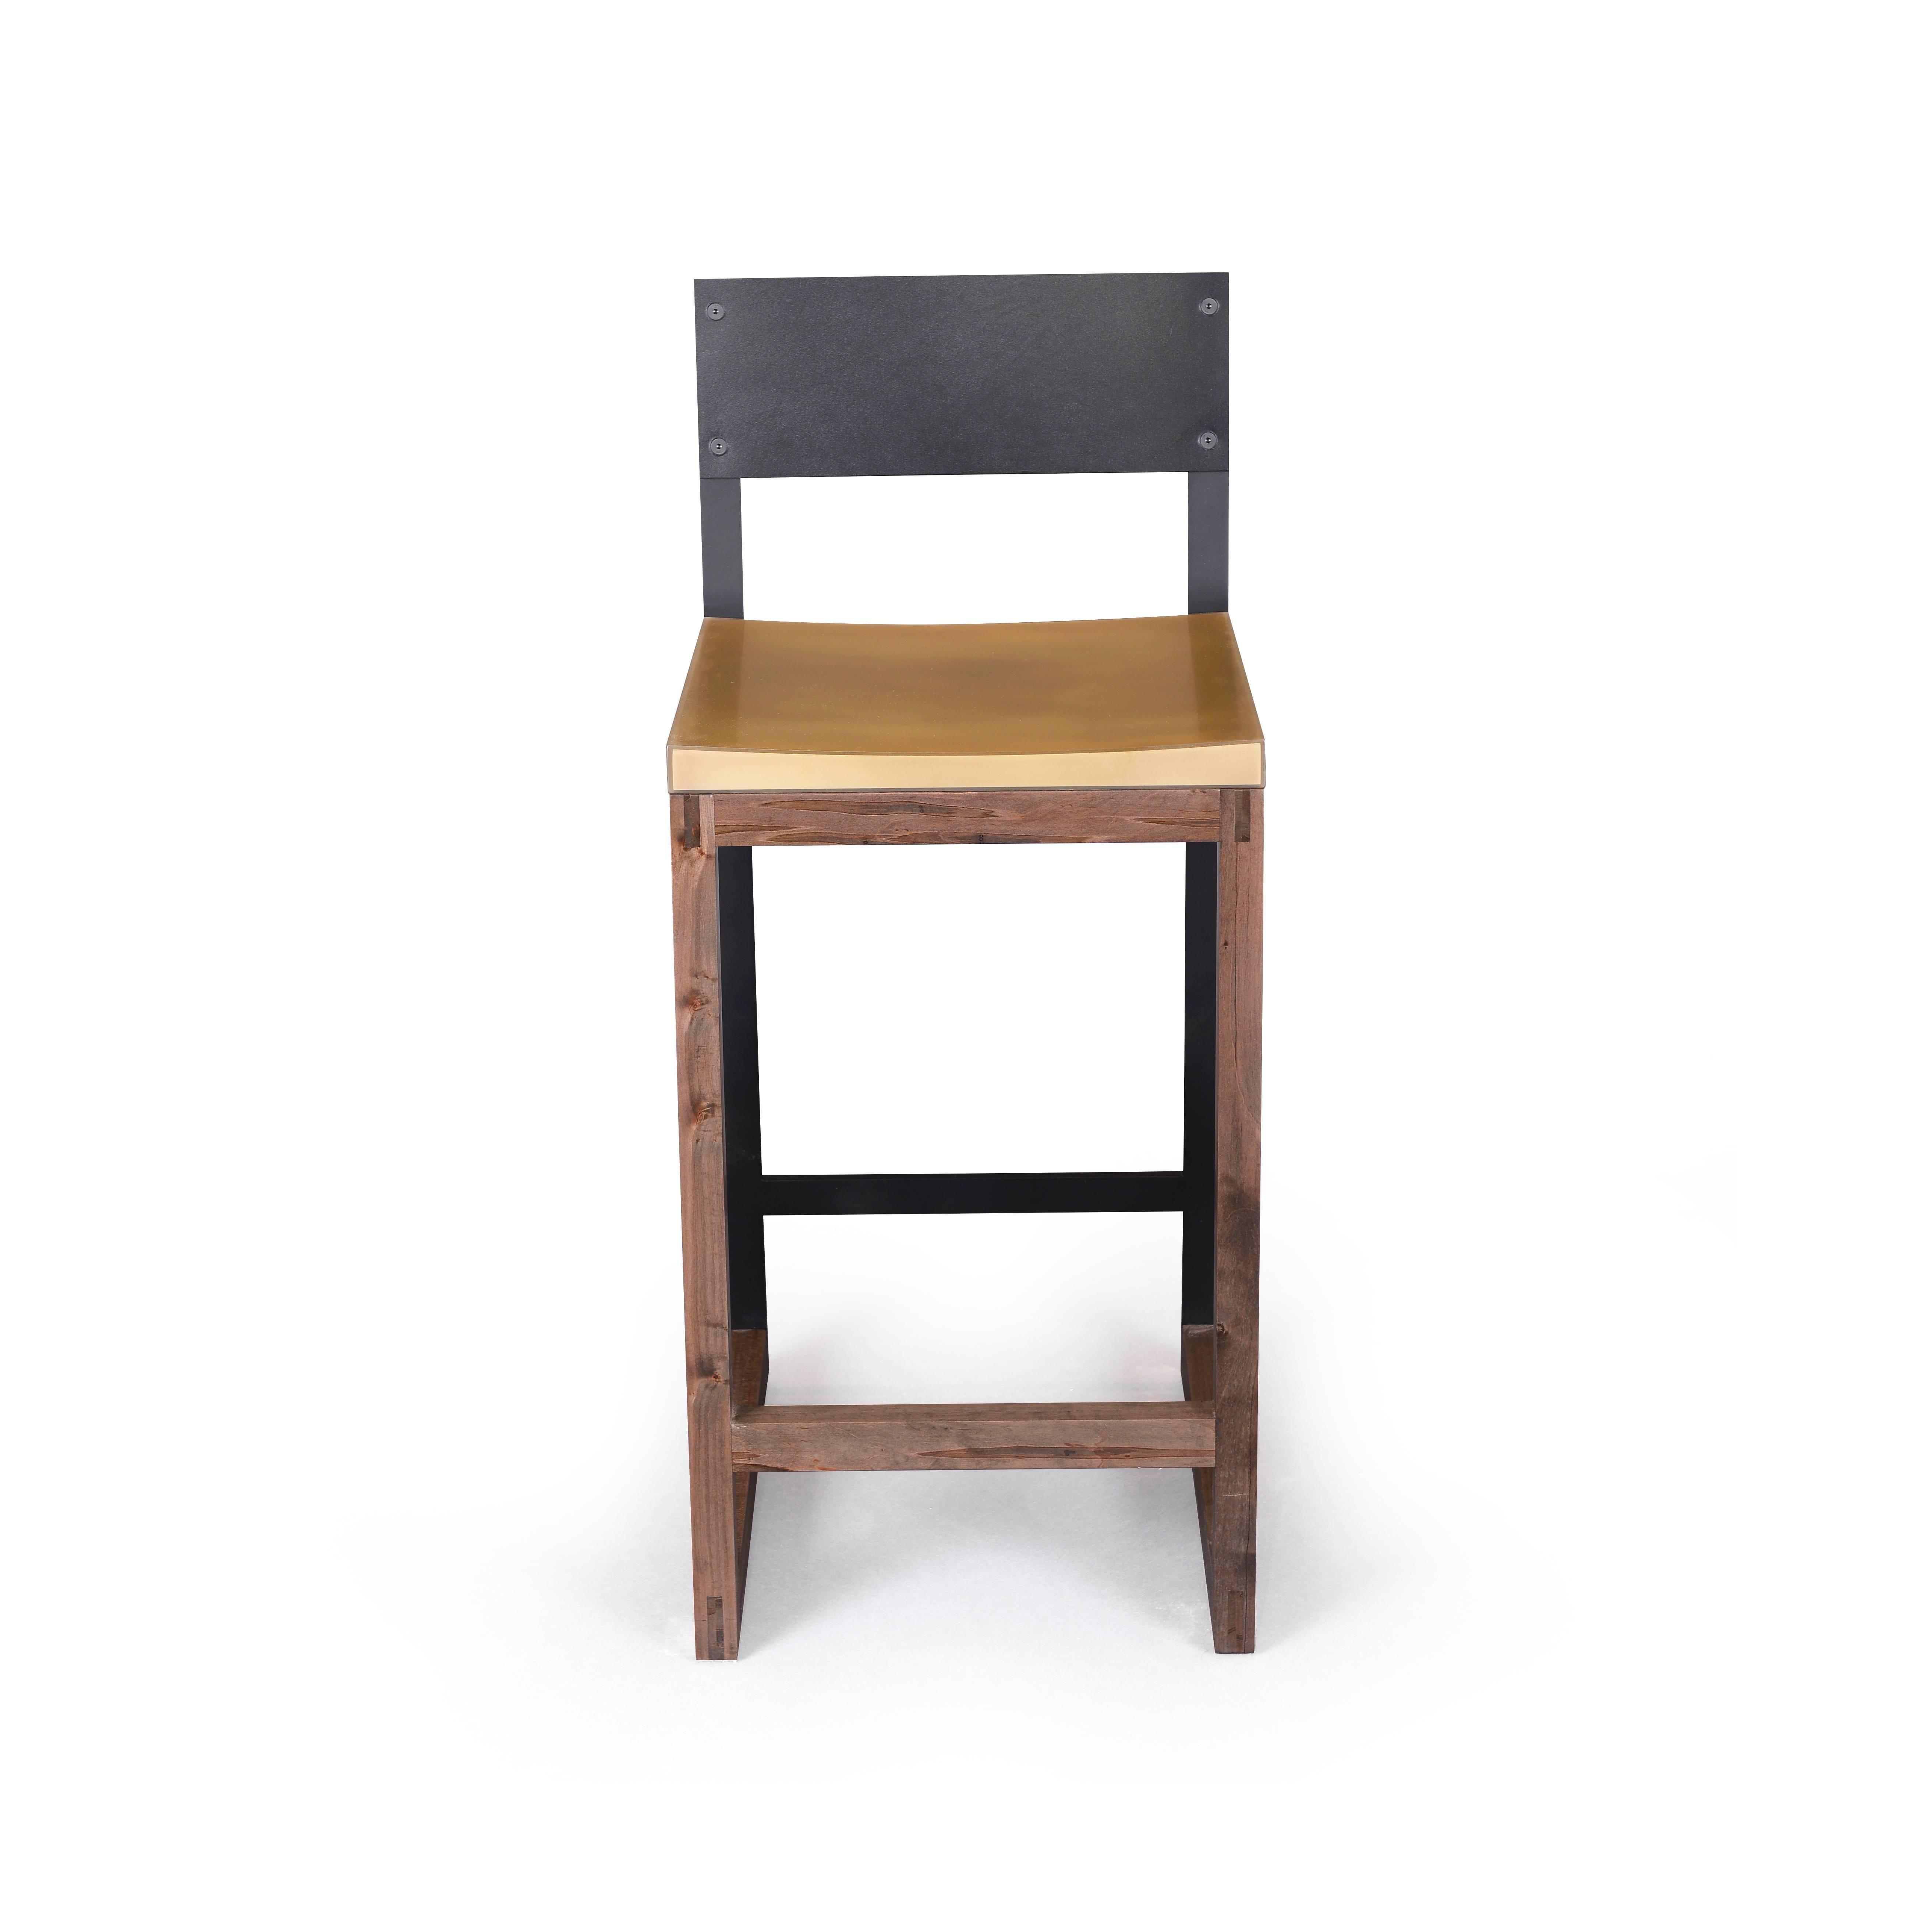 The sleek design of the gotham stool features a Bronze encased in epoxy resin seat, laminated soft black leather back, and an oxidized ambrosia maple base. The resin is extremely smooth and non-porous, making it ideal as a seat surface.

Can be made